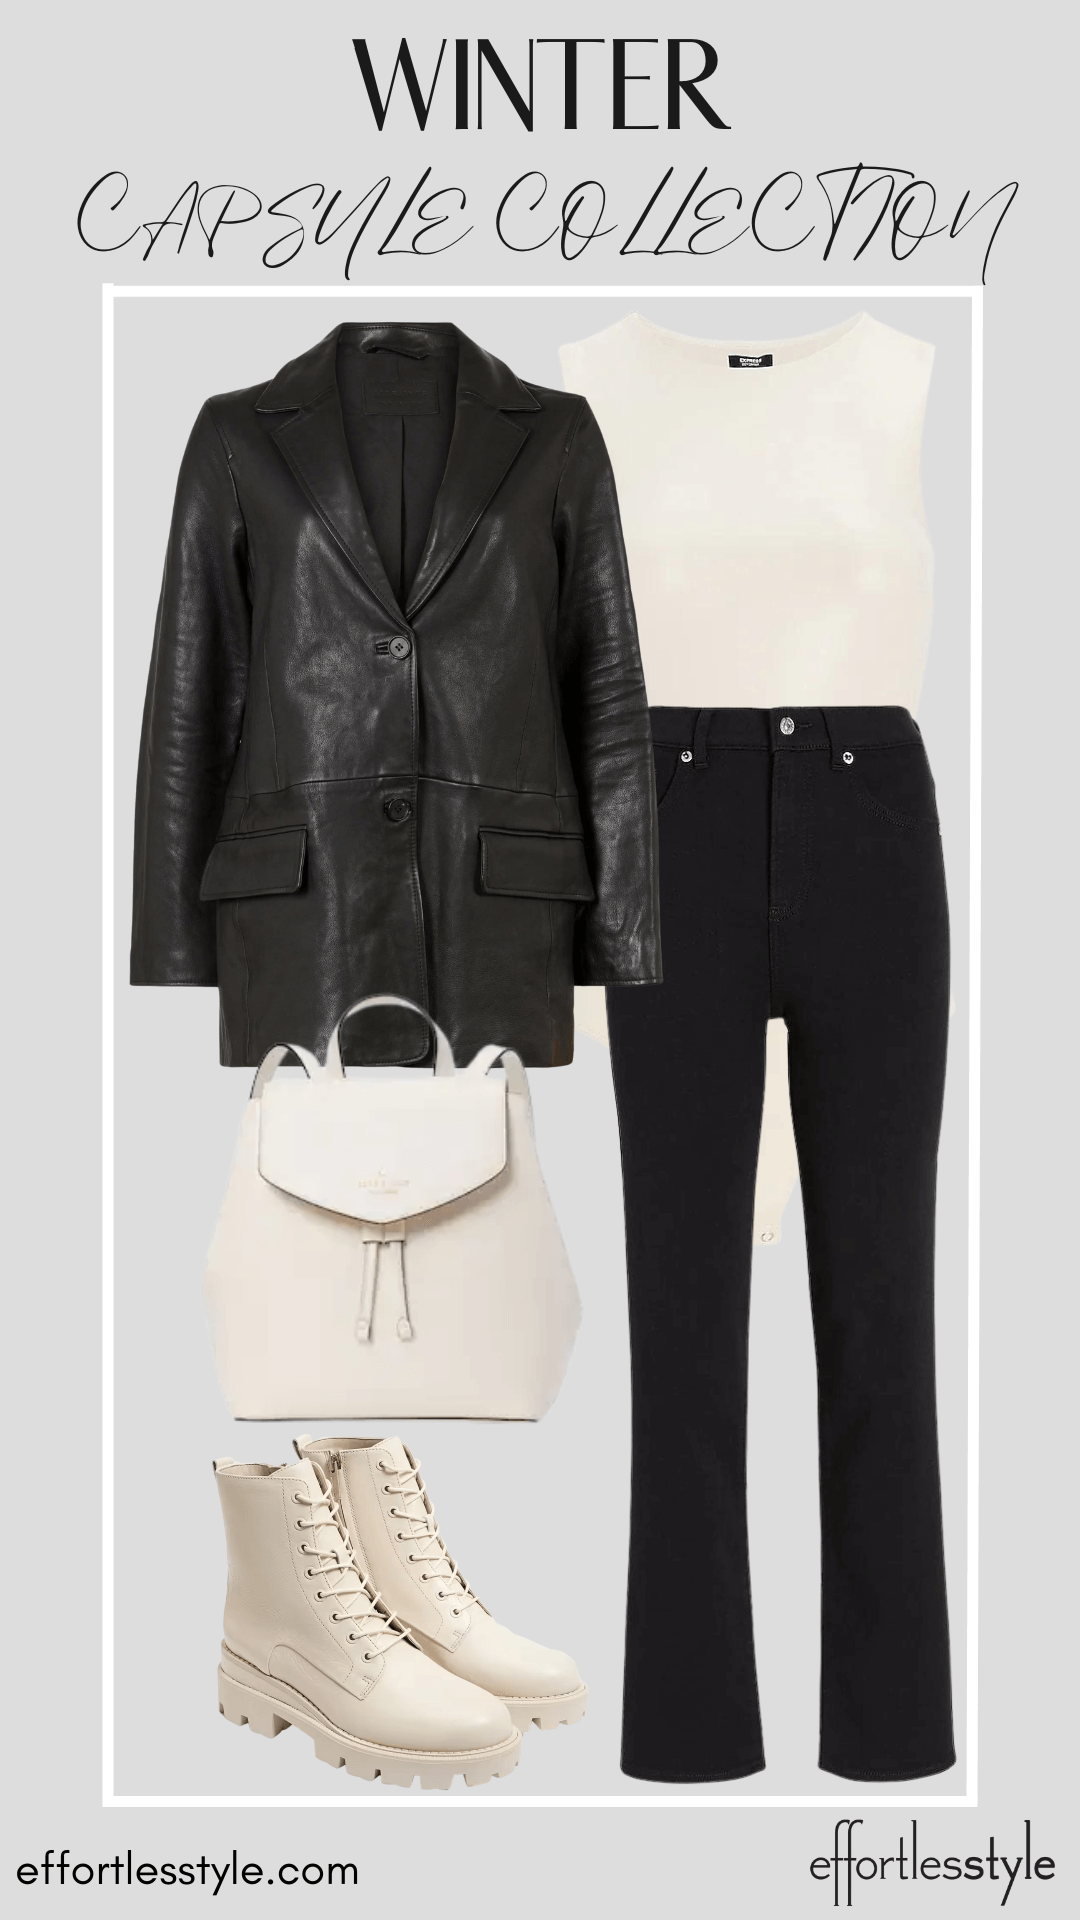 How To Wear Our Winter Capsule Wardrobe - Part 1 Leather Blazer & Faux Leather Bodysuit & Black Jeans splurgeworthy pieces for winter pieces worth spending money on how to wear a leather blazer with black jeans how to wear black and ivory for winter